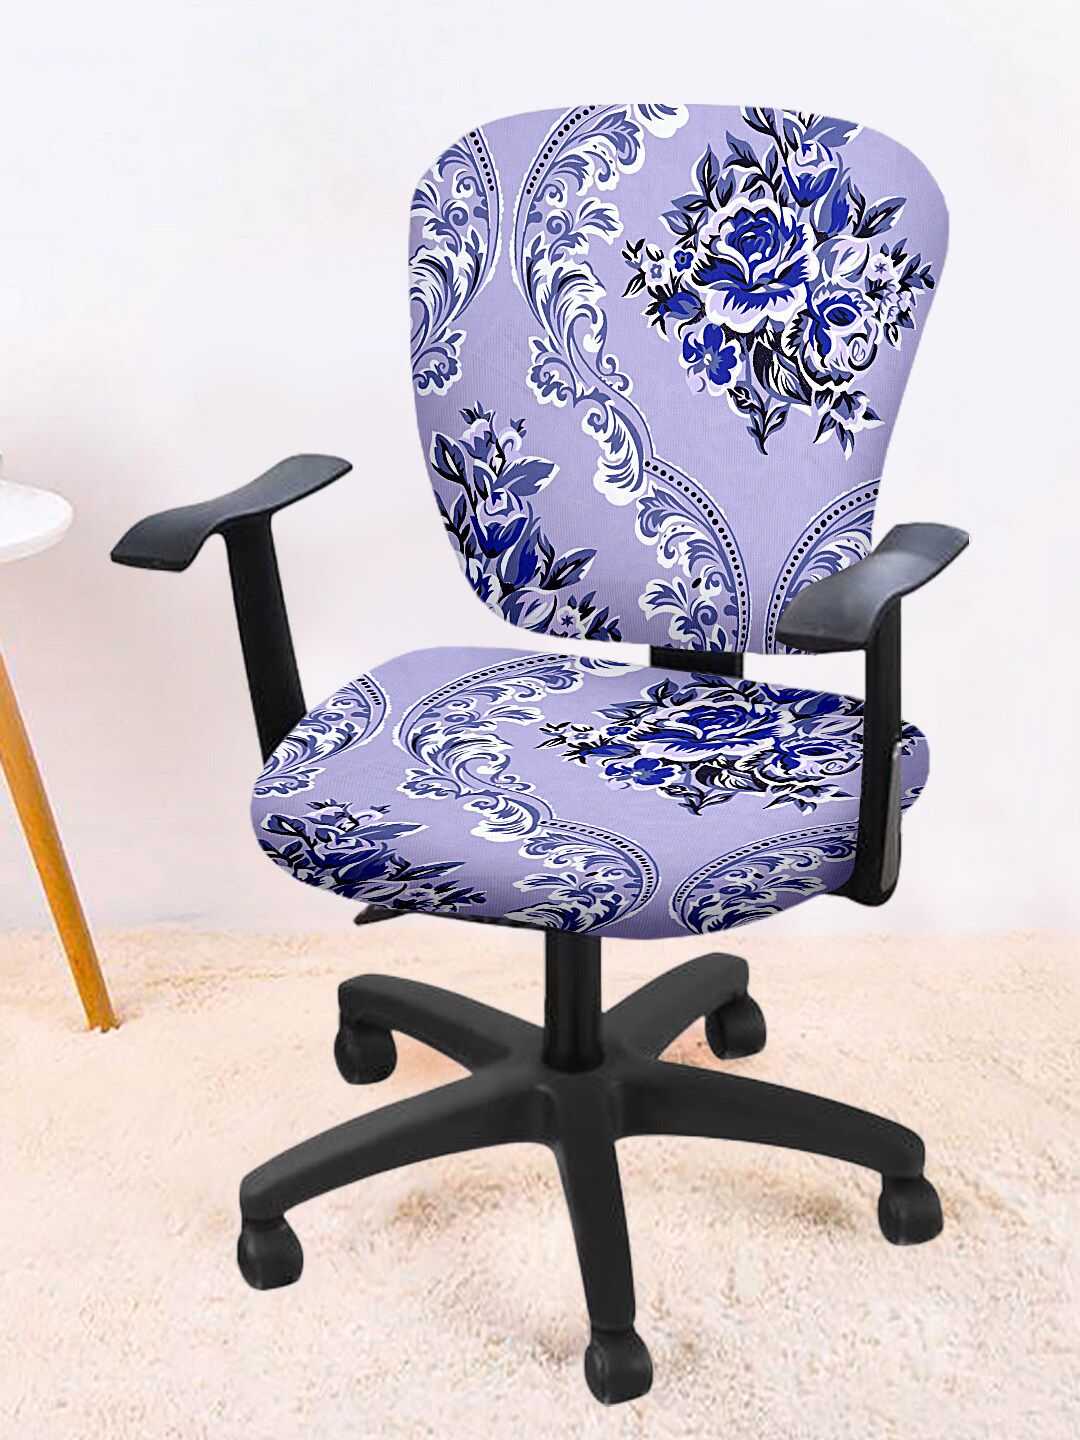 Cortina Set Of 8 Lavender & White Floral Print Chair Covers Price in India